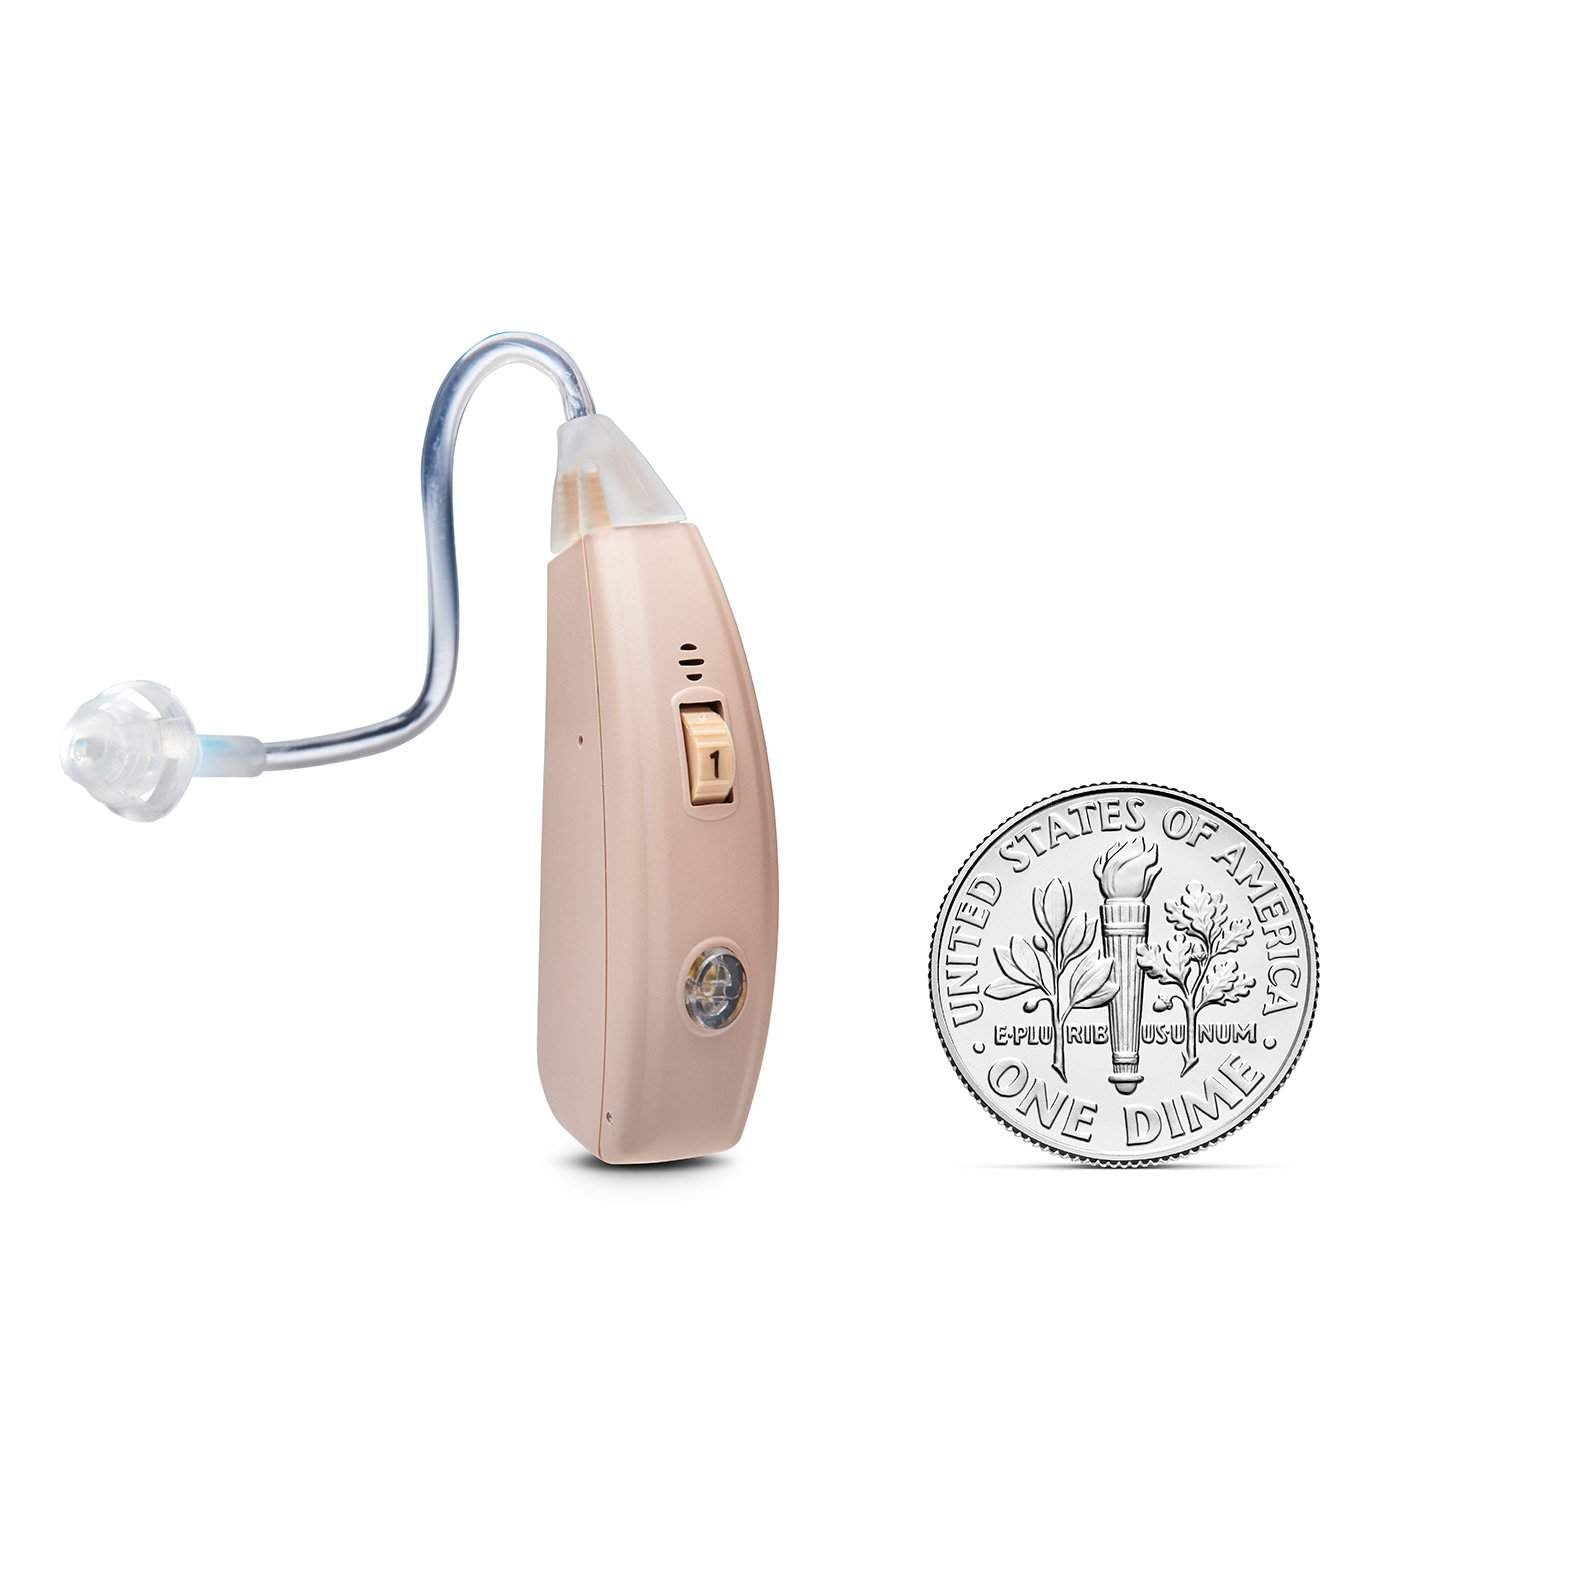 HDR 400 Rechargeable Digital Hearing Aid